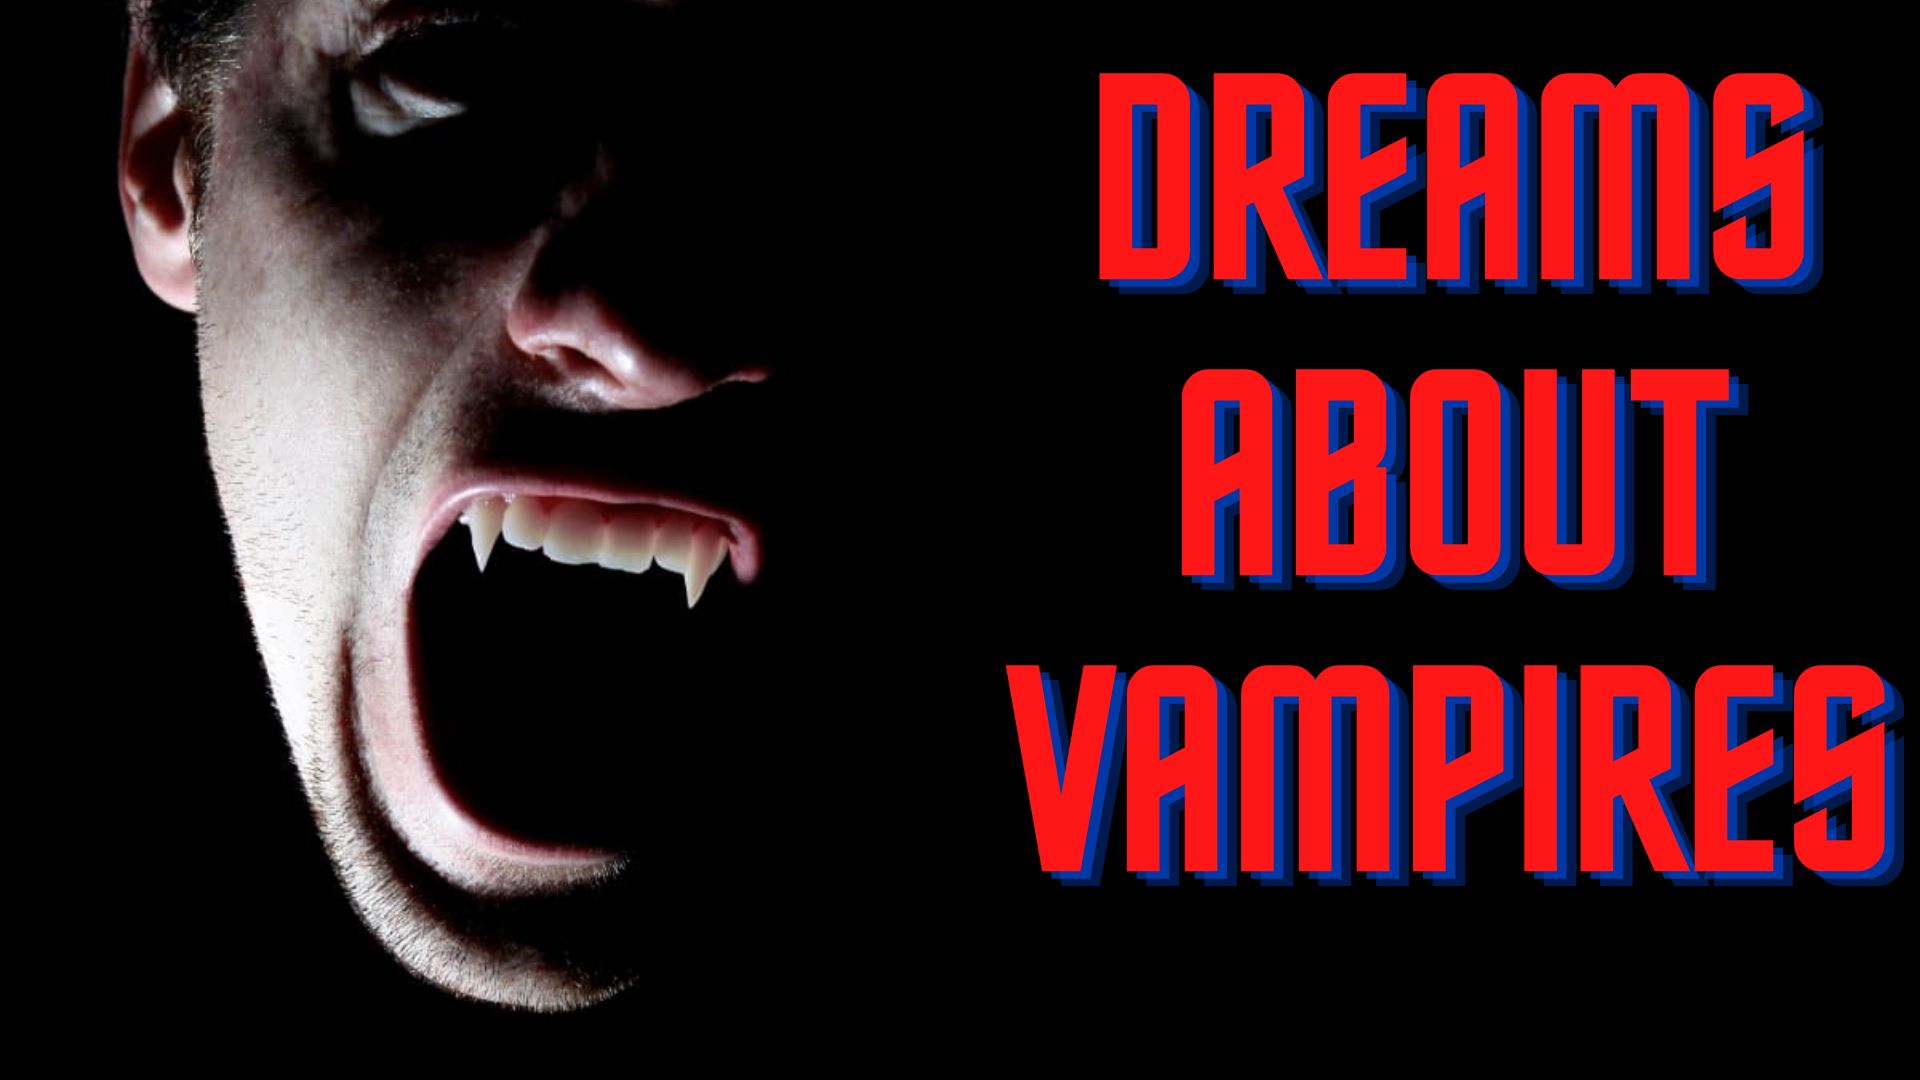 Dreams About Vampires - May Indicate Your Fear Of Death